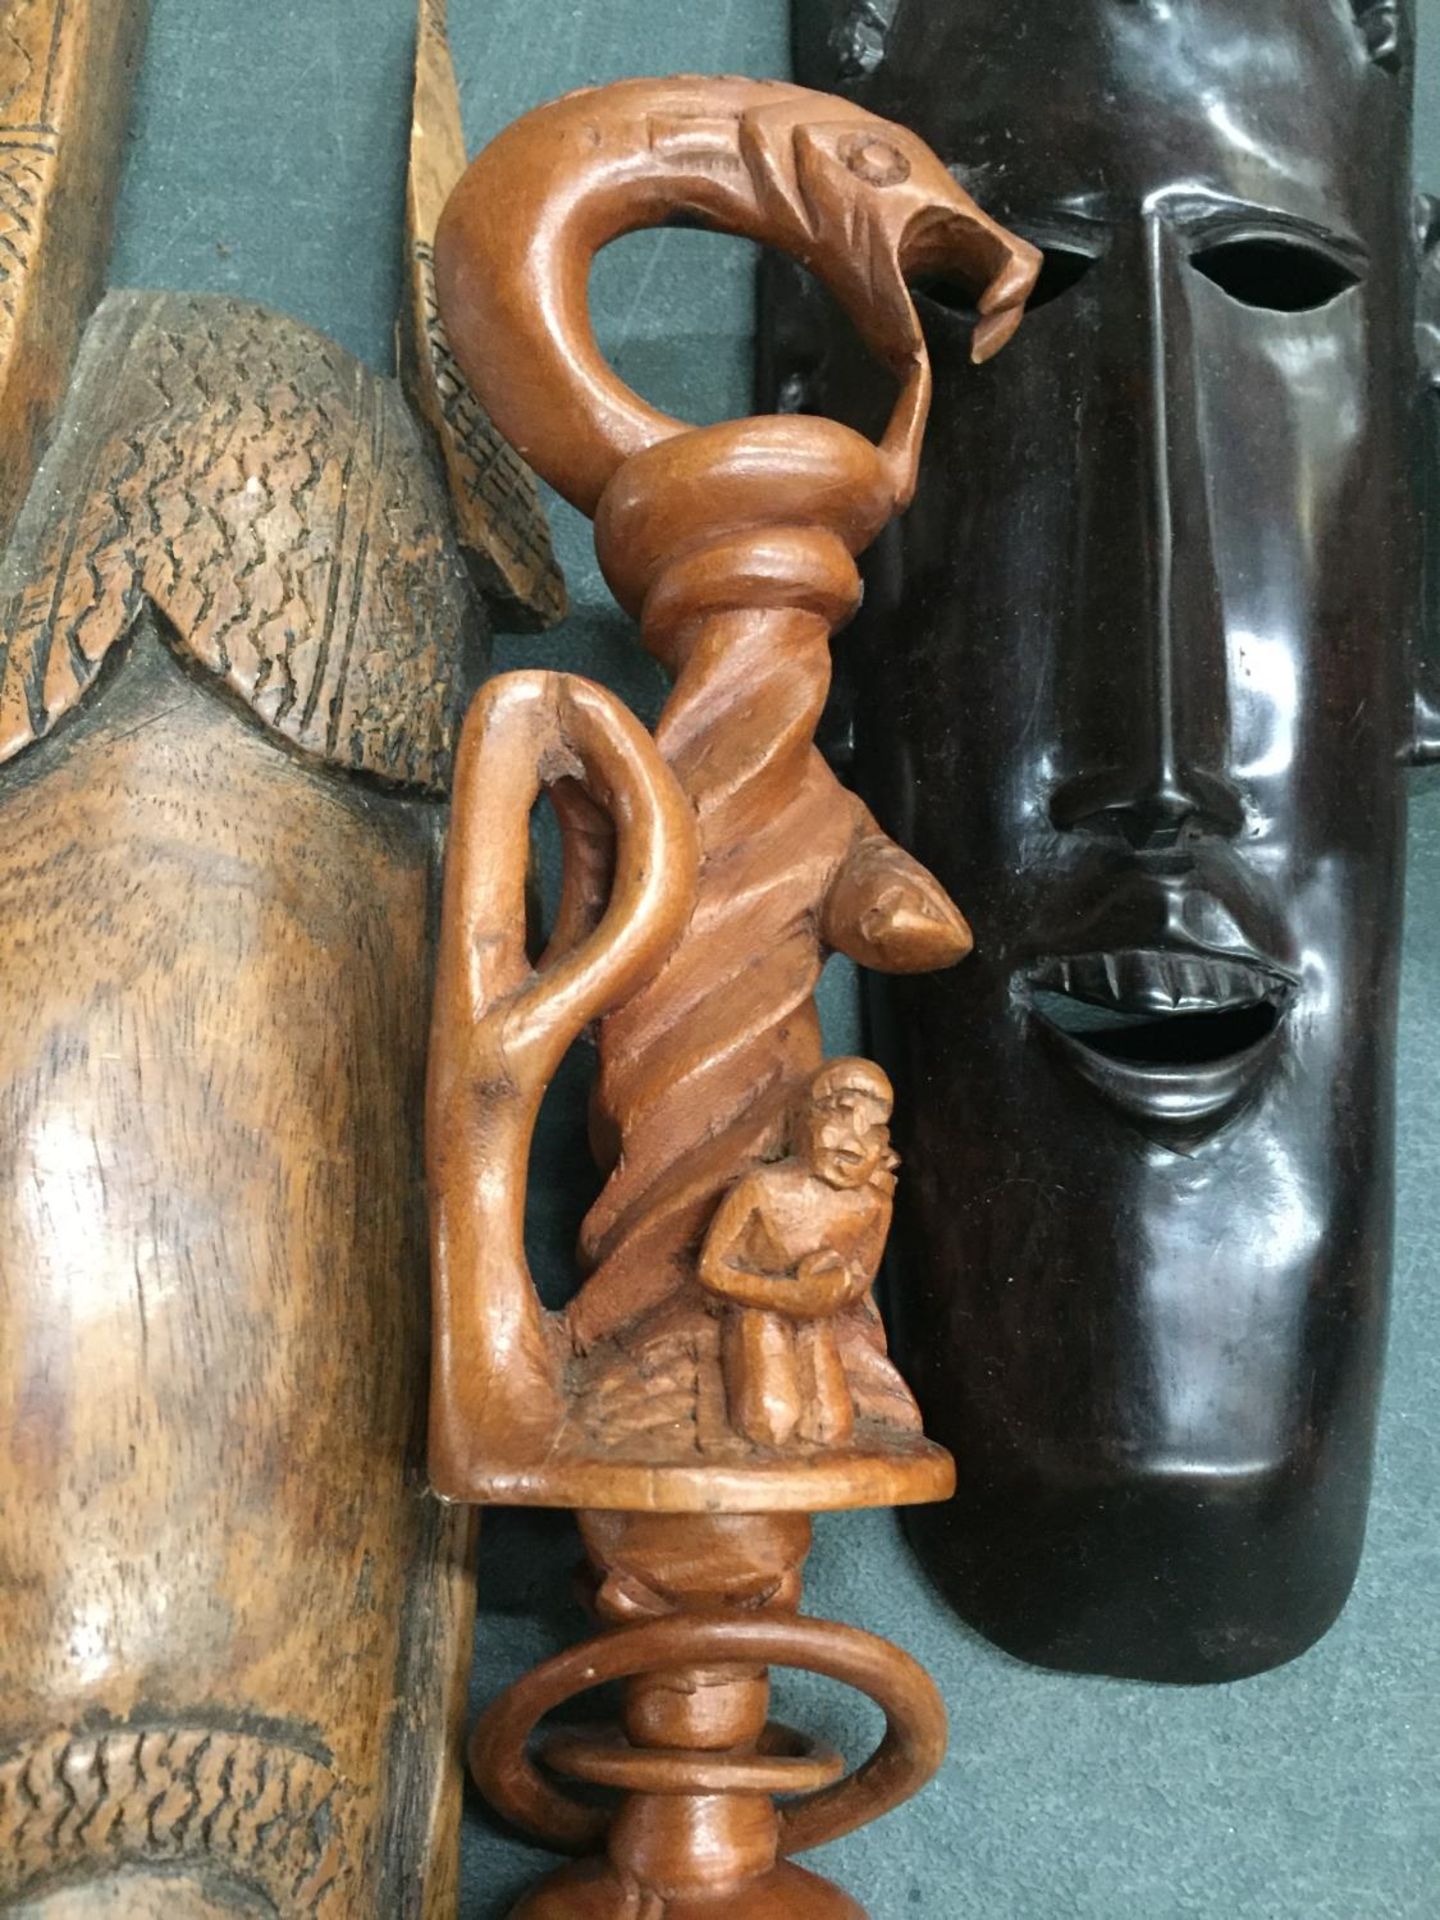 TWO AFRICAN STYLE FACE MASKS PLUS A TRIBAL STYLE CARVED STICK WITH SERPENT DESIGN - Bild 3 aus 4